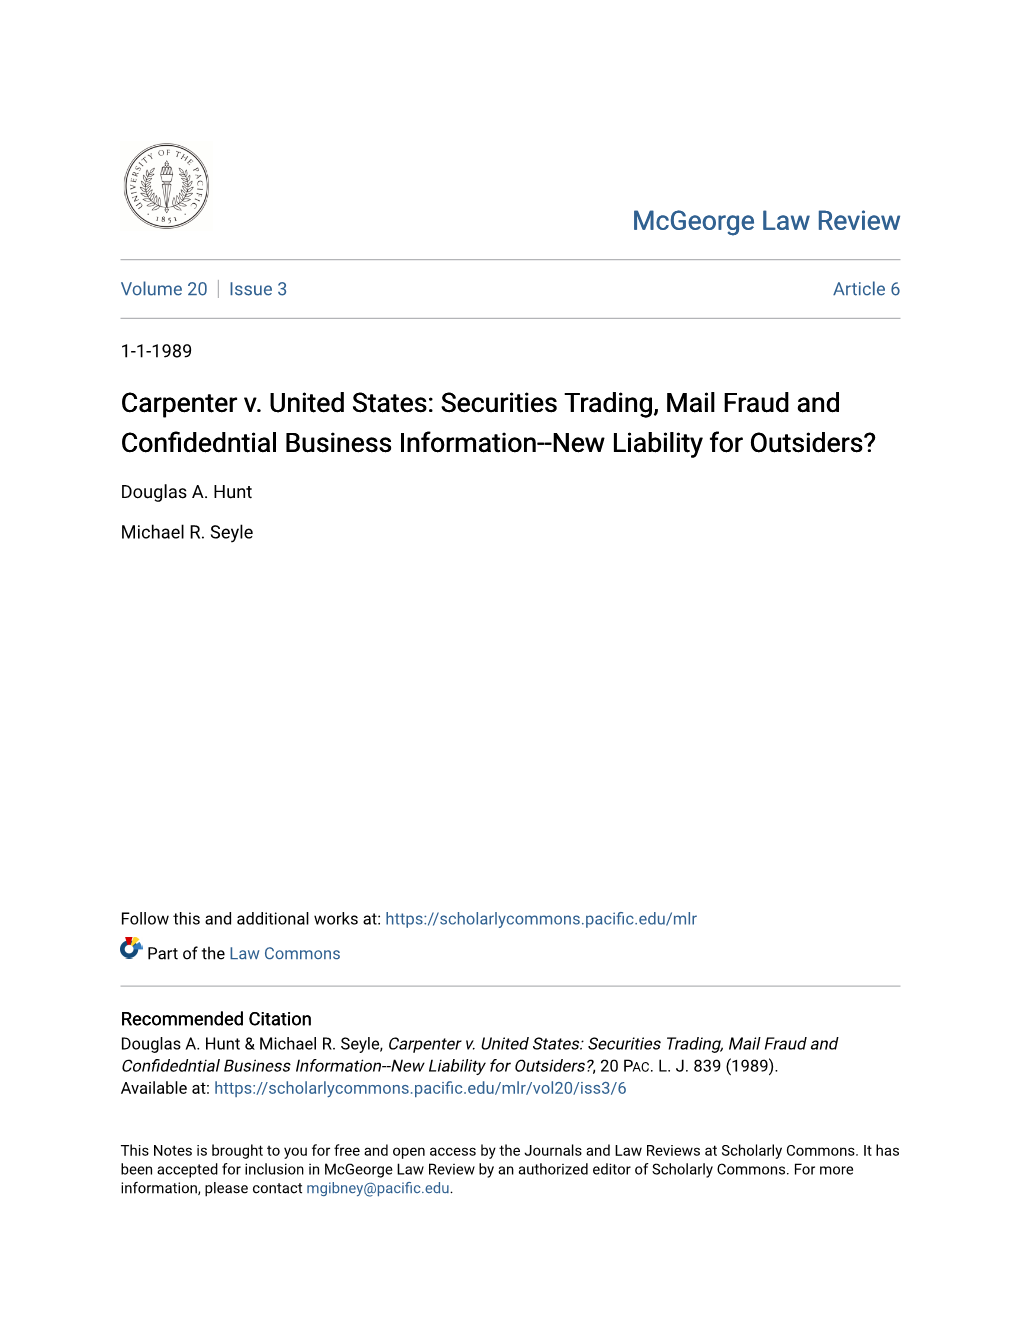 Carpenter V. United States: Securities Trading, Mail Fraud and Confidedntial Business Information--New Liability for Outsiders?